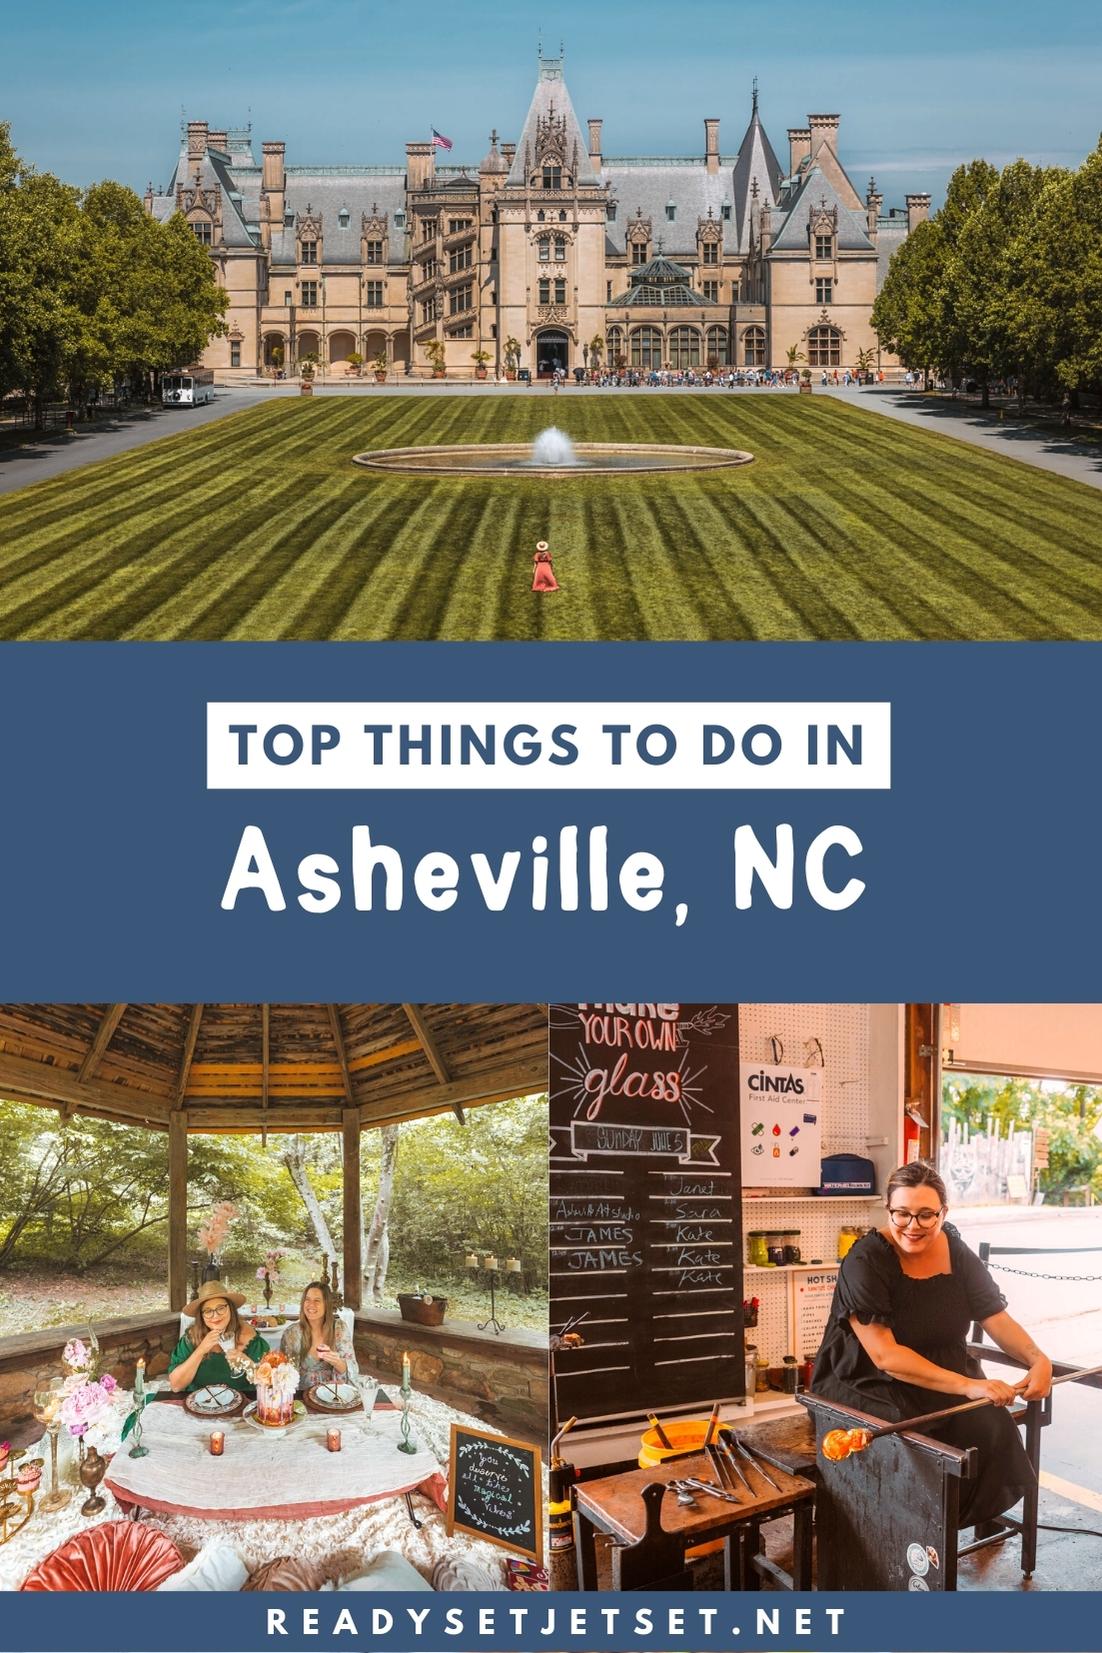 Top Things to Do in Asheville, NC